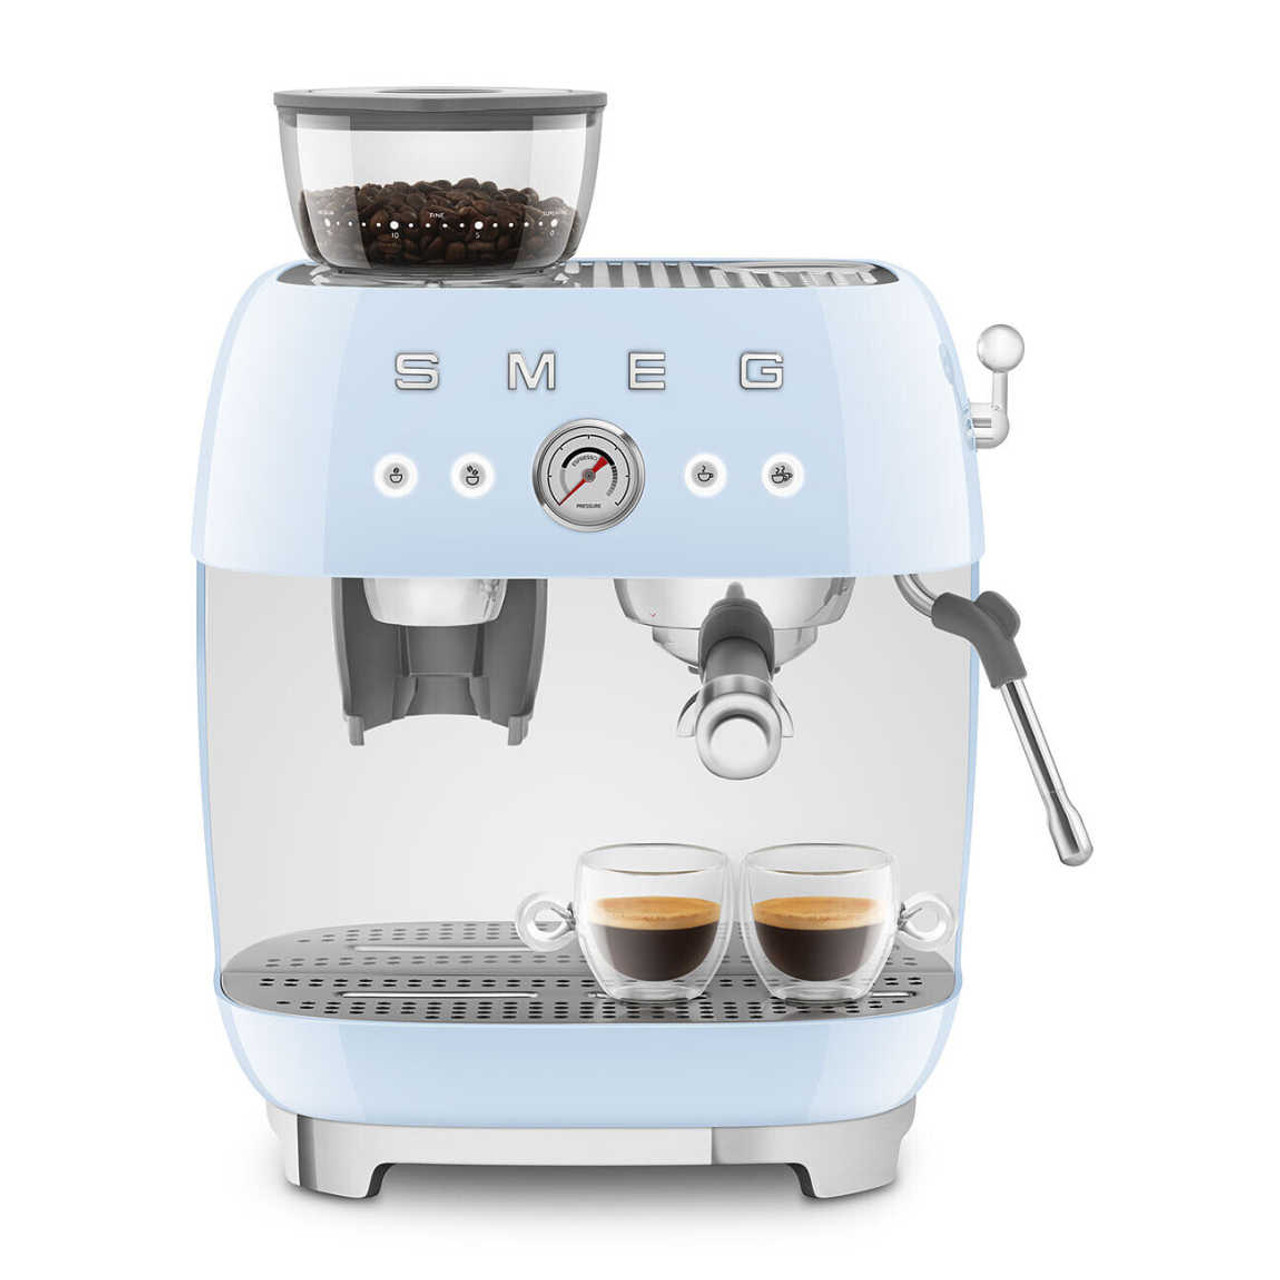 https://cdn11.bigcommerce.com/s-hccytny0od/images/stencil/1280x1280/products/5859/26388/SMEG_Espresso_Machine_and_Grinder_2__98885.1698261201.jpg?c=2?imbypass=on